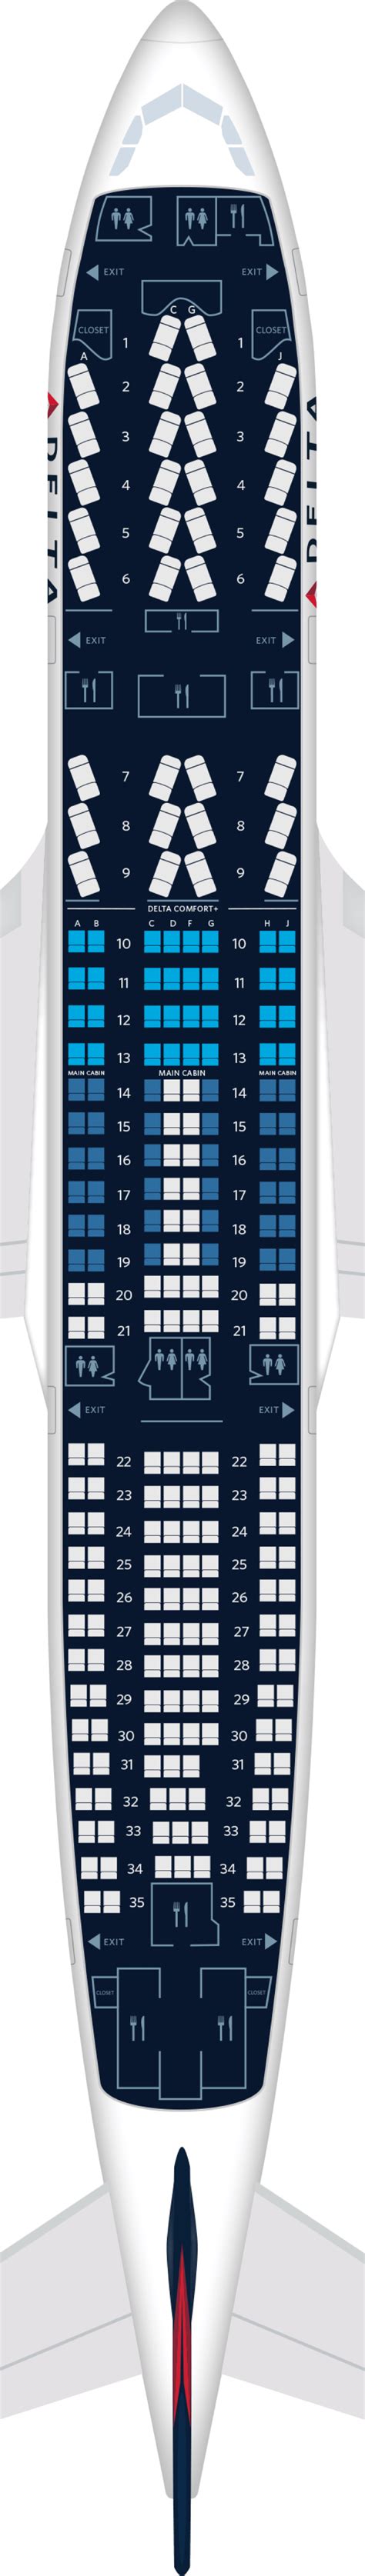 Airbus A330 200 Aircraft Seat Maps Specs And Amenities Delta Air Lines